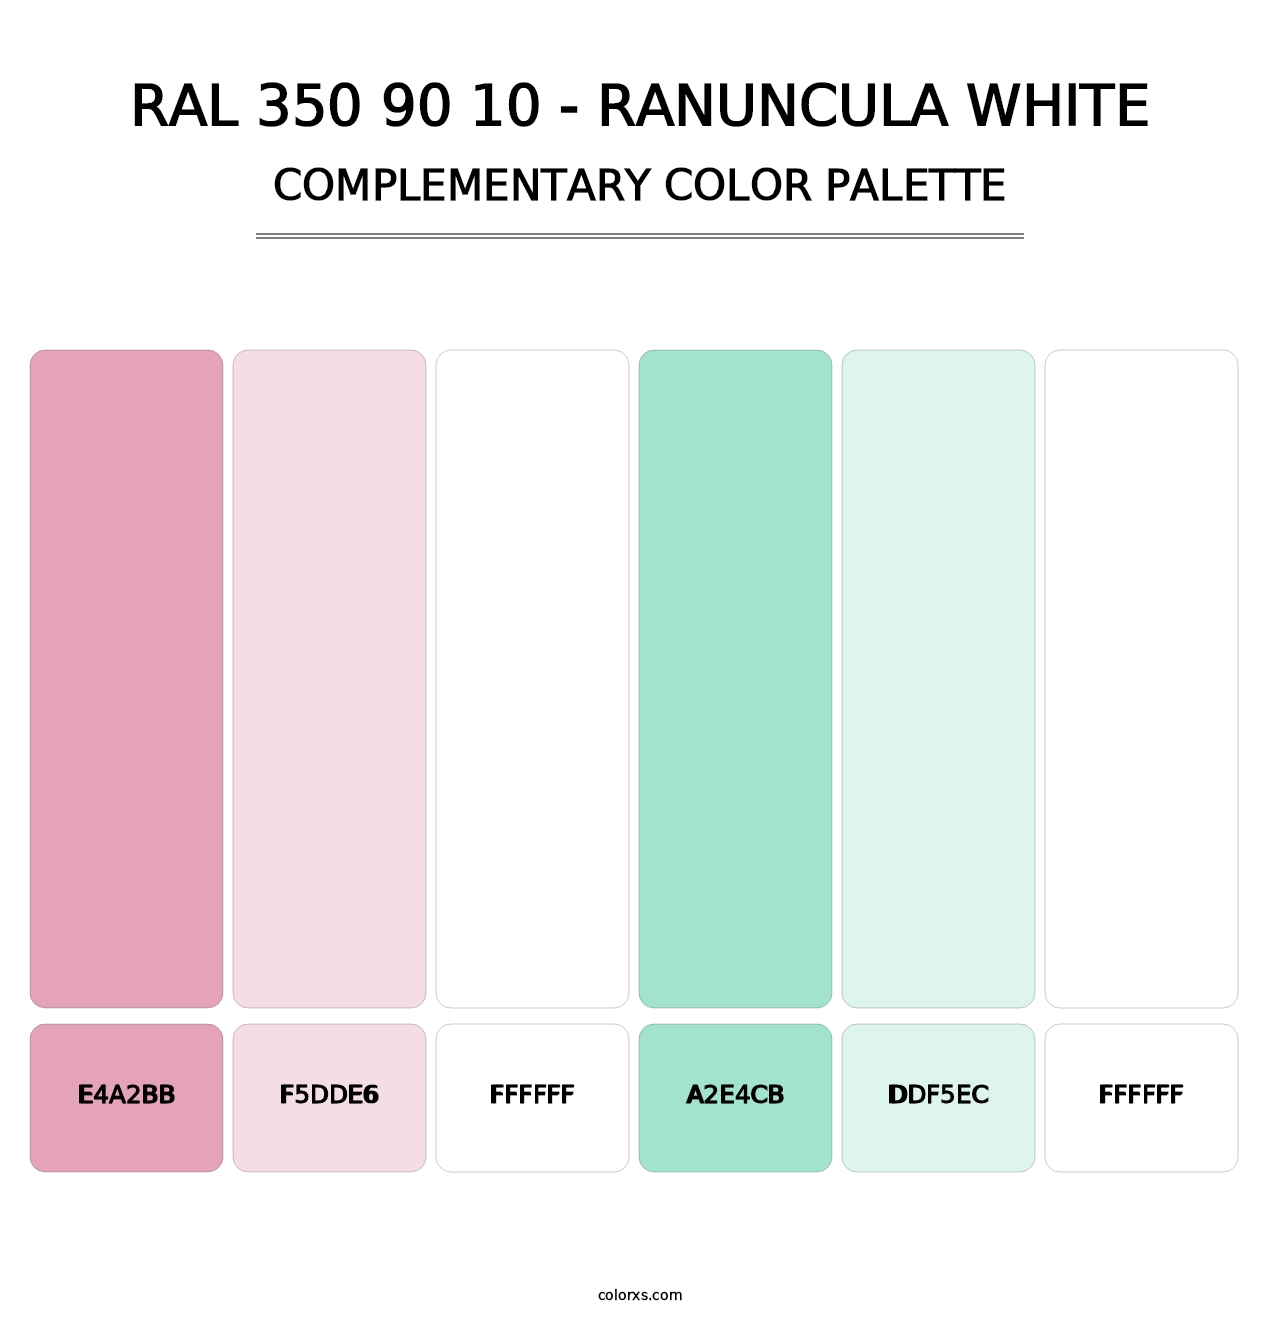 RAL 350 90 10 - Ranuncula White - Complementary Color Palette